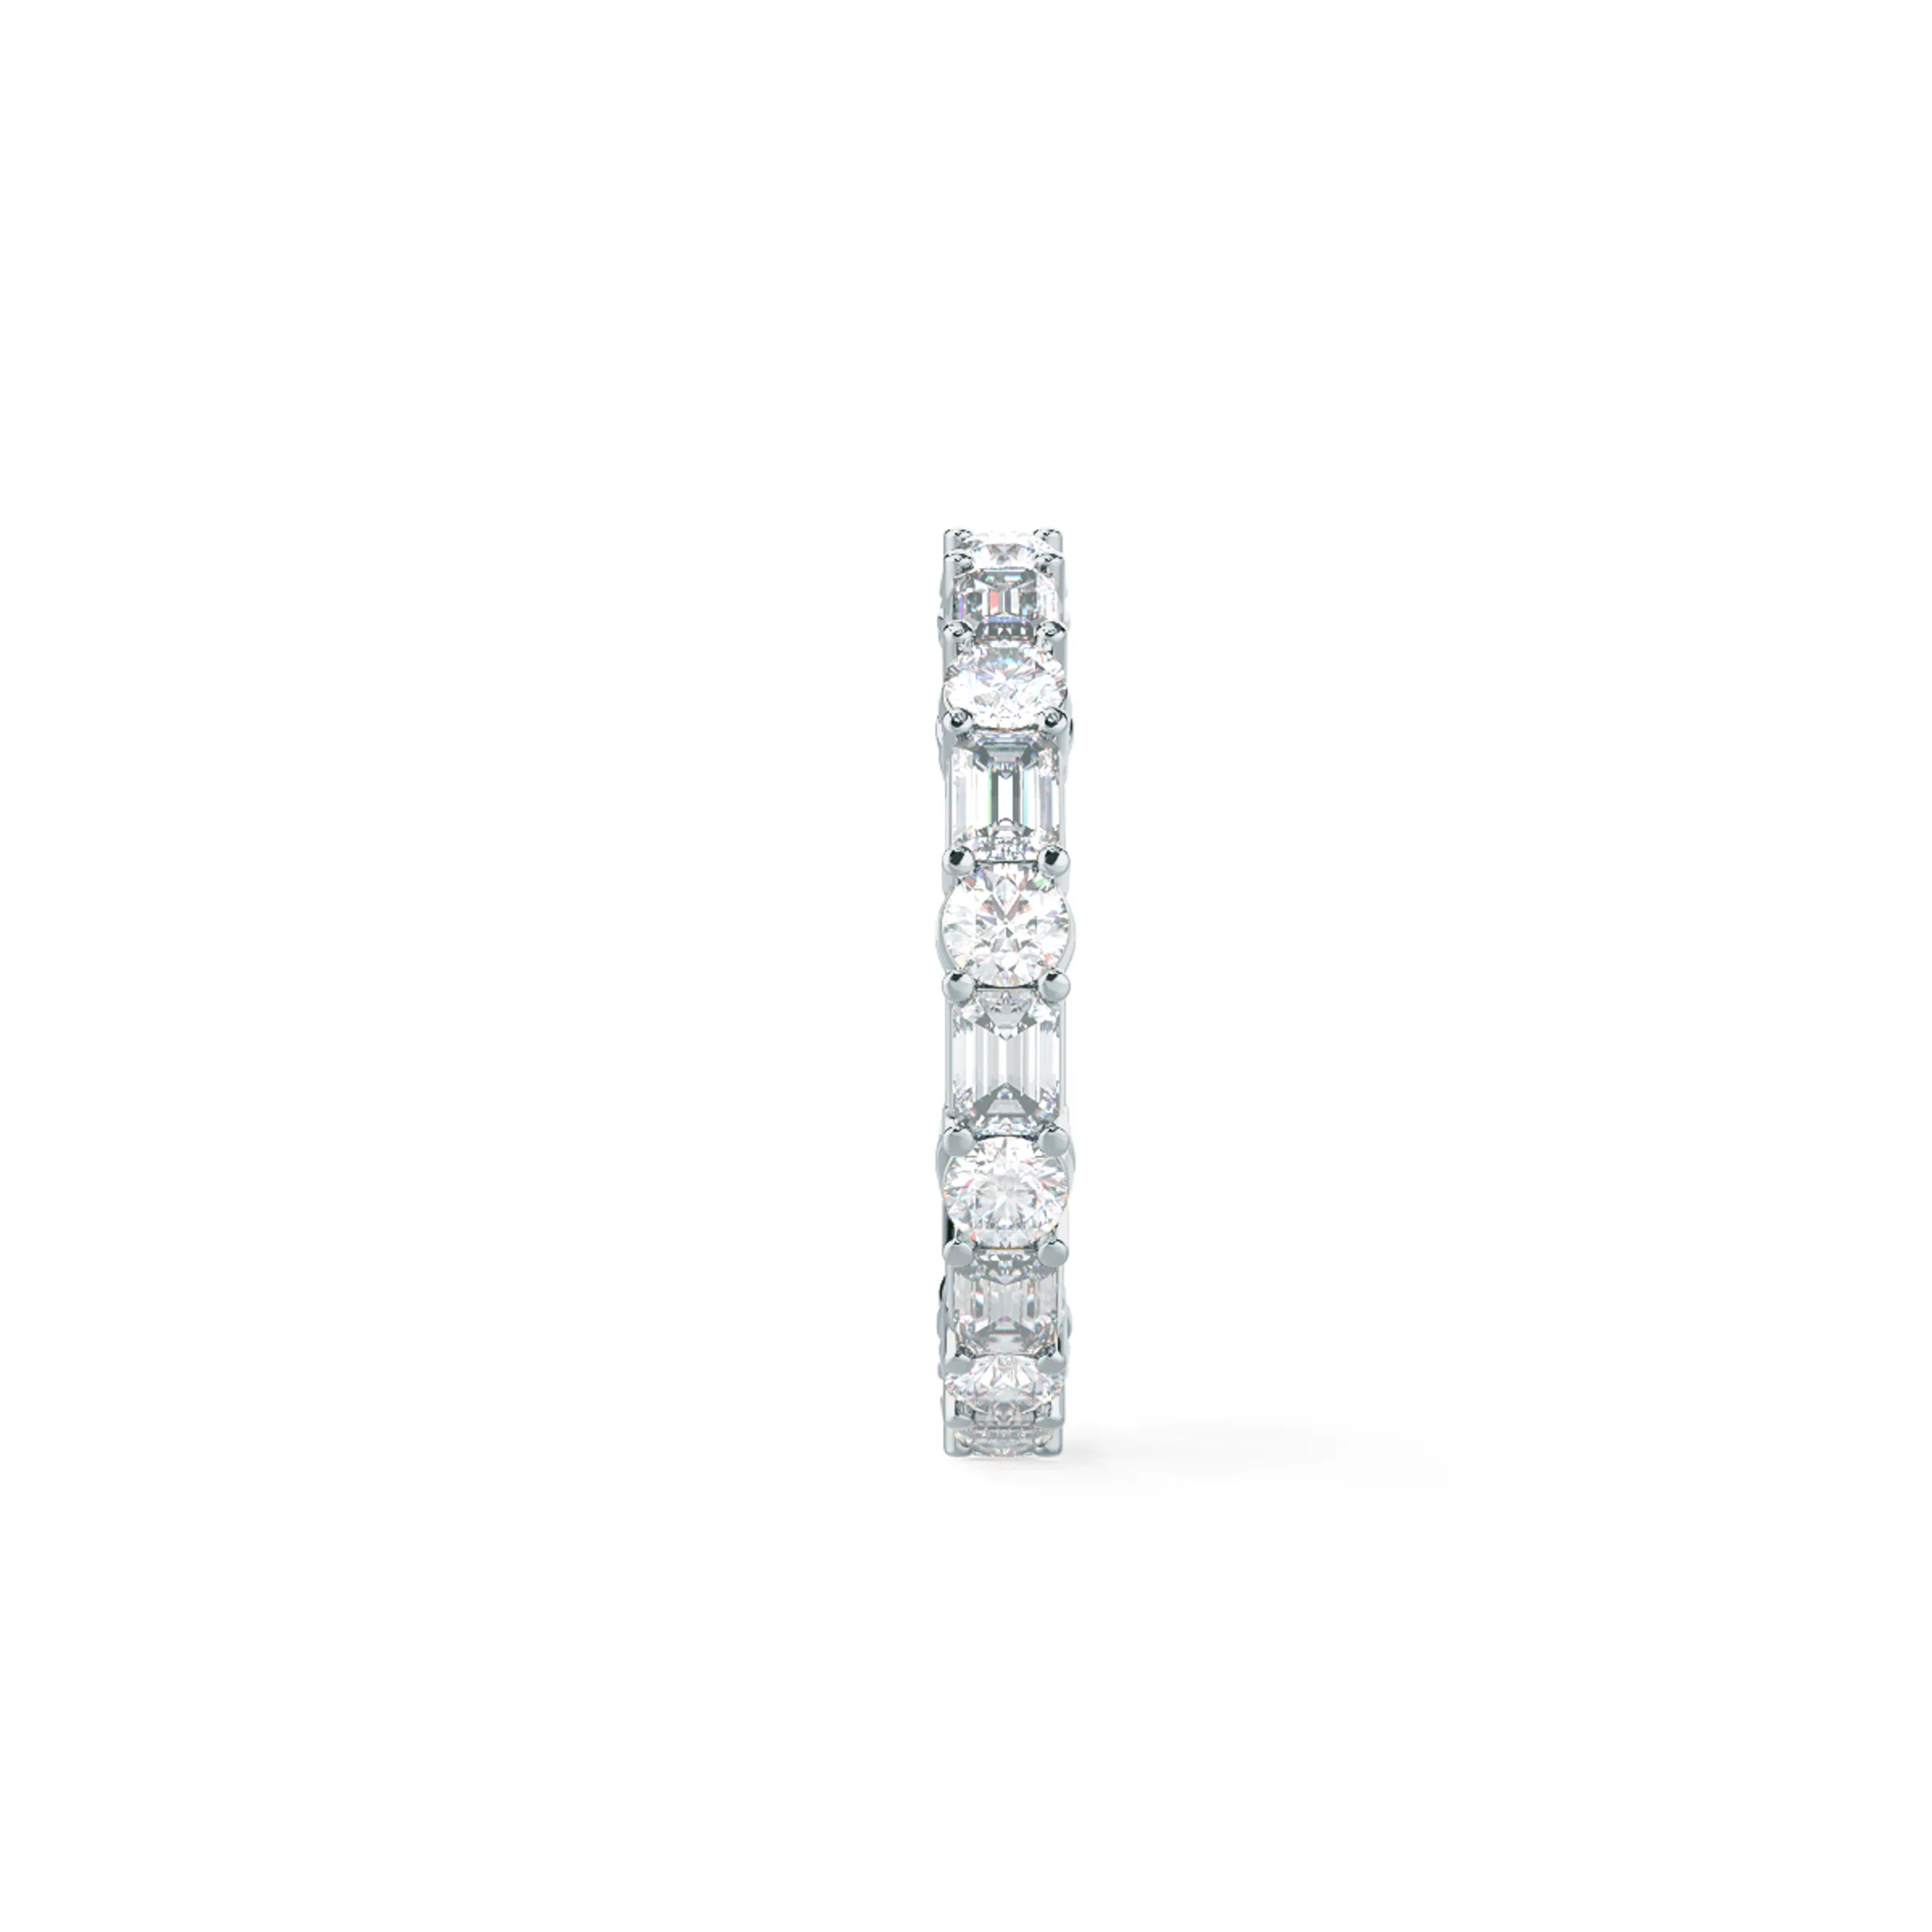 High Quality 2.5 ct Diamonds Emerald and Round East-West Eternity Band in 18k White Gold (Side View)